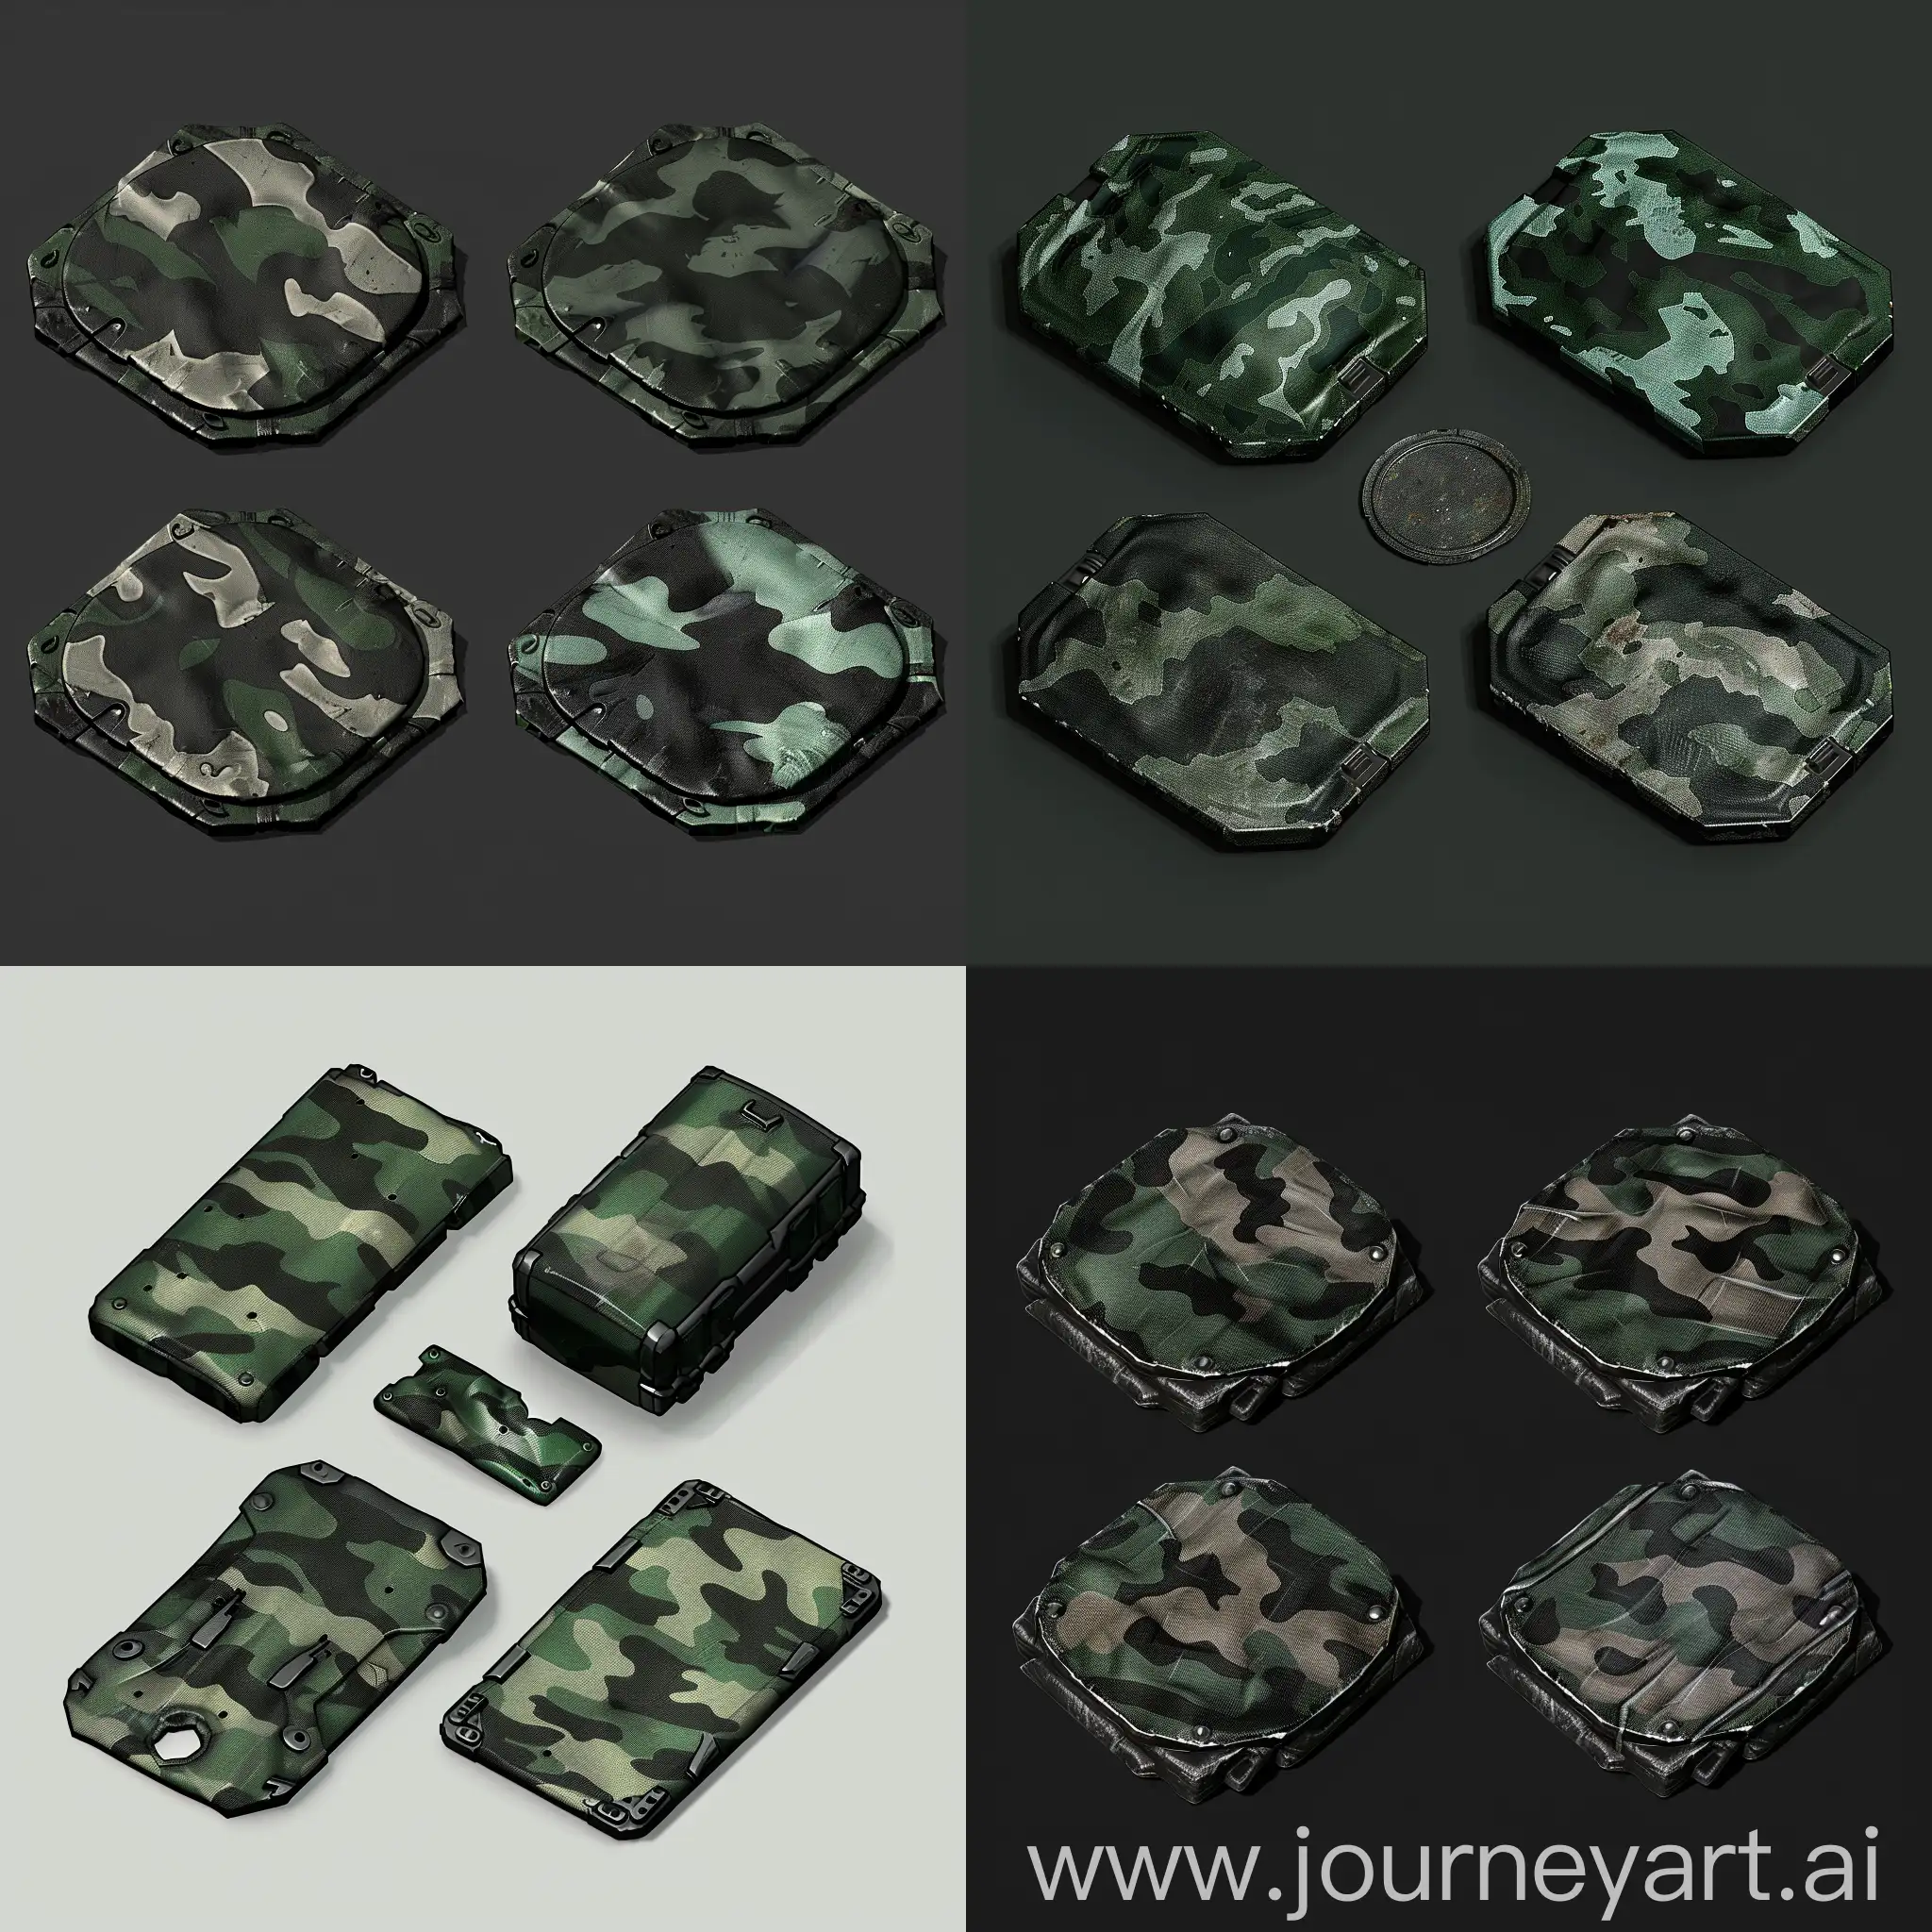 Isometric-Camo-Metal-Plate-Set-in-Ultrarealistic-Style